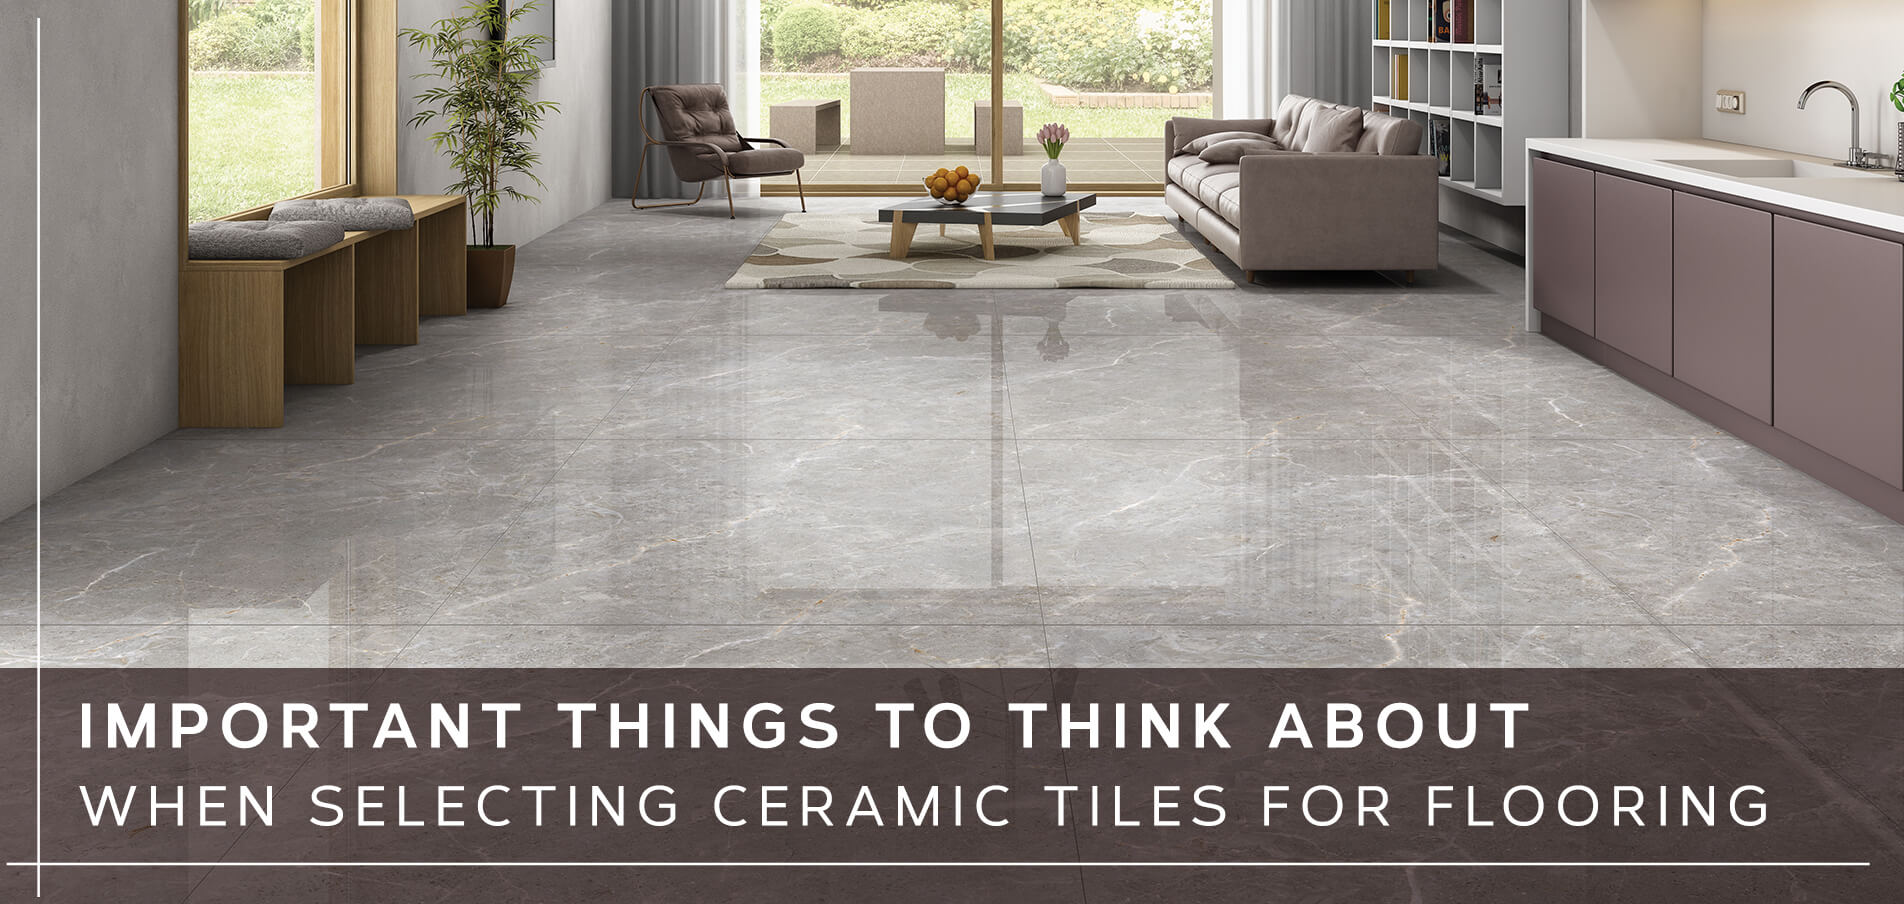 Important Things to Consider When Selecting Ceramic Tiles for Flooring